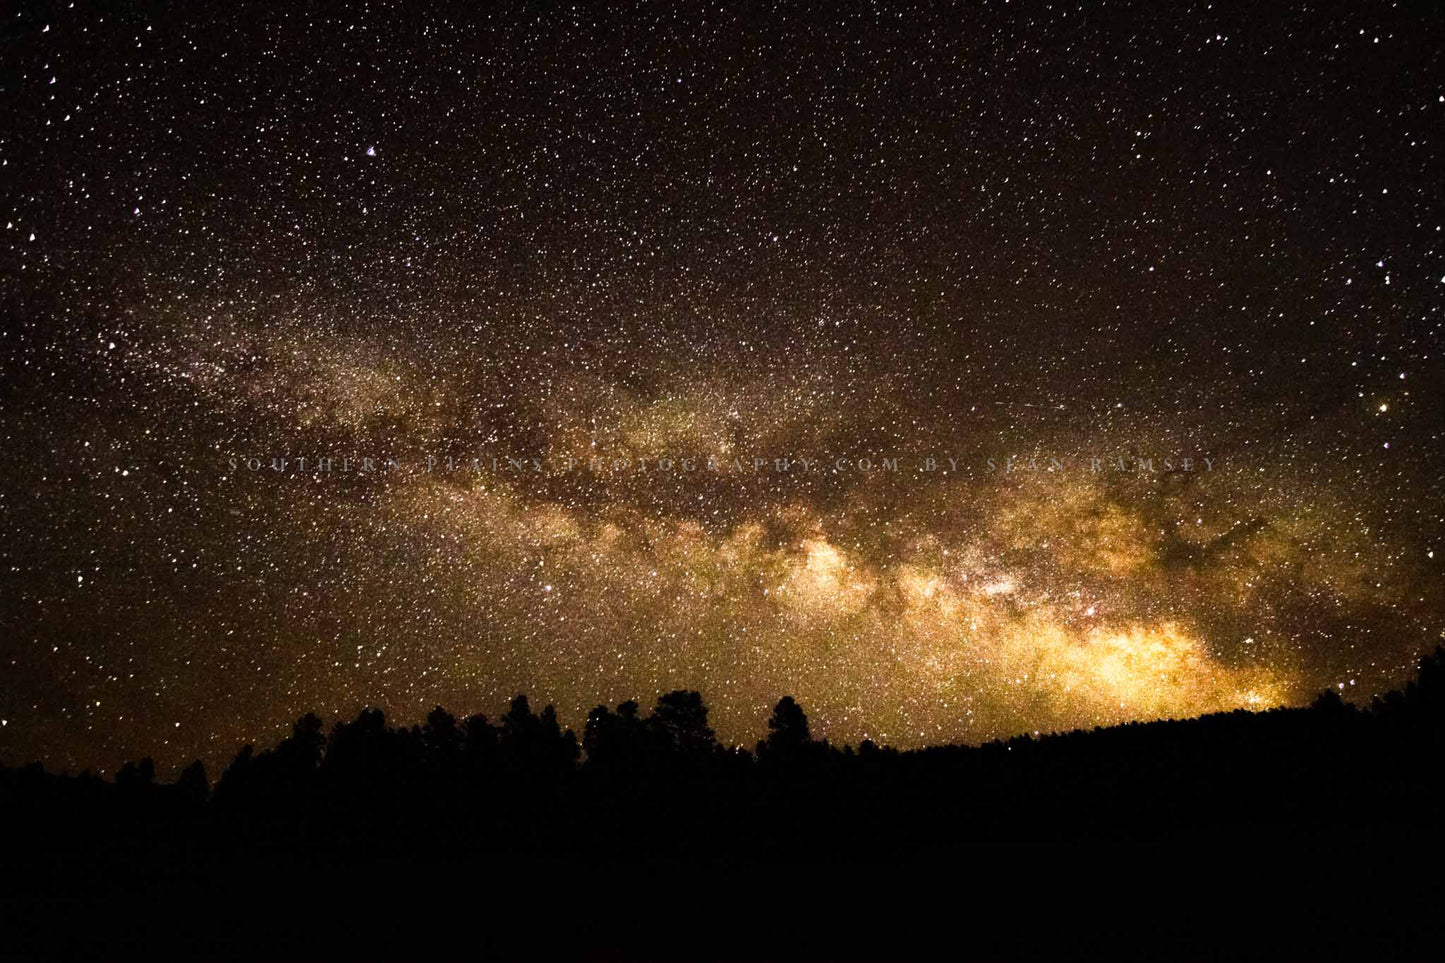 Night sky photography print of the Milky Way rising above pine tree silhouettes on a starry night in Colorado by Sean Ramsey of Southern Plains Photography.